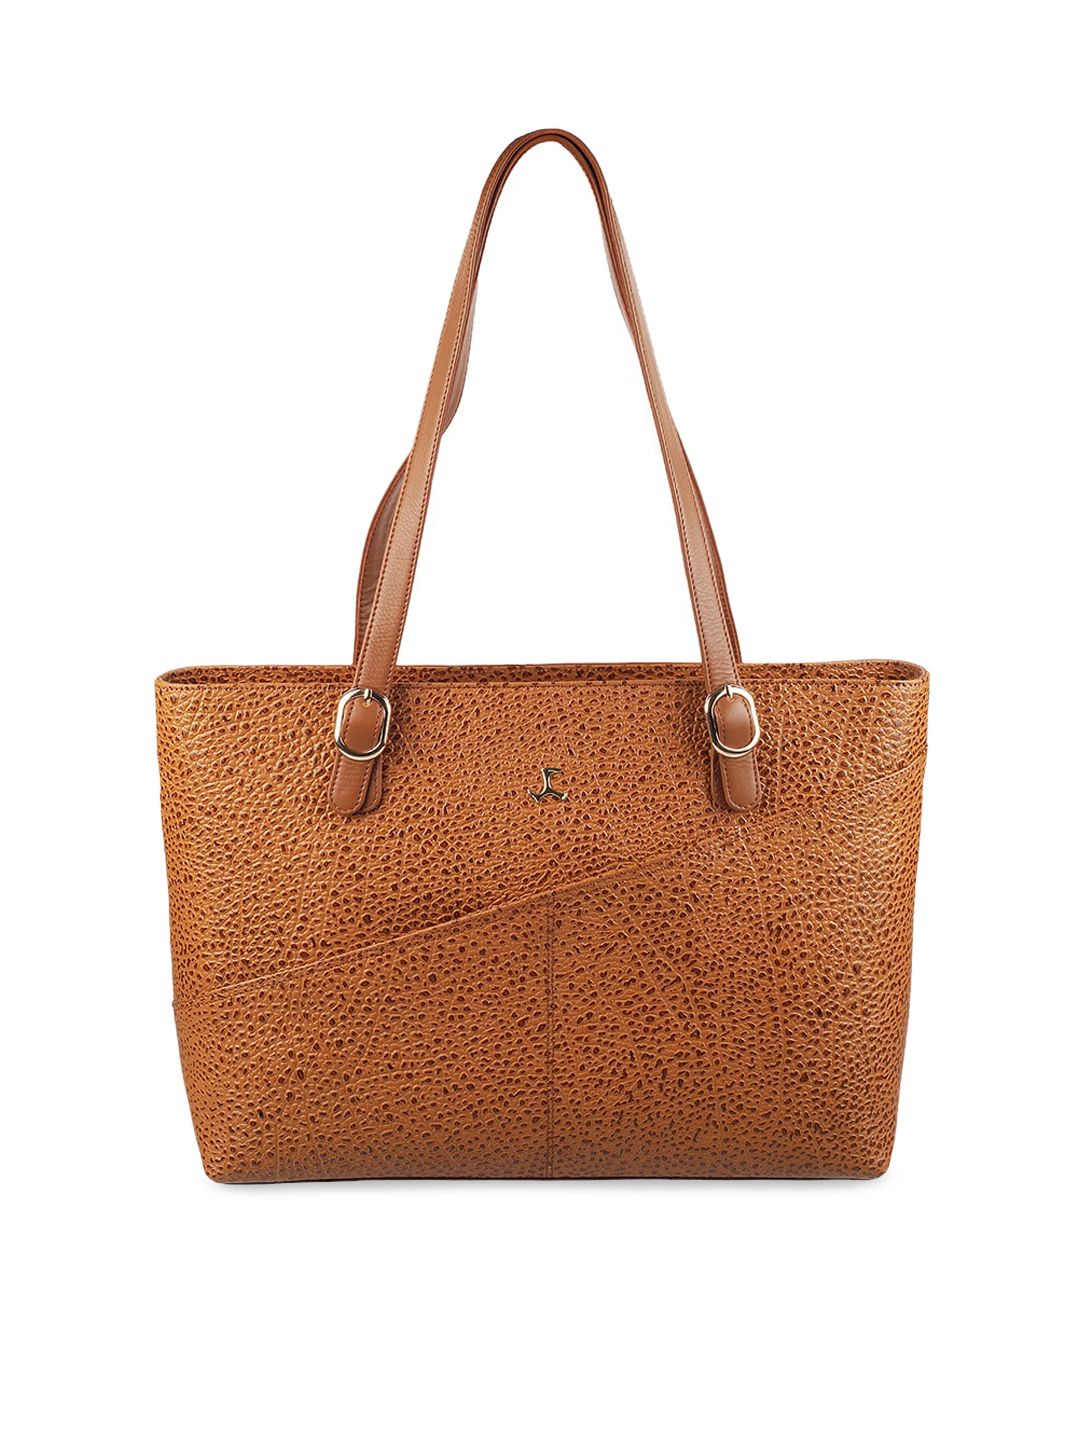 Mochi Tan Textured Leather Structured Shoulder Bag with Cut Work Price in India